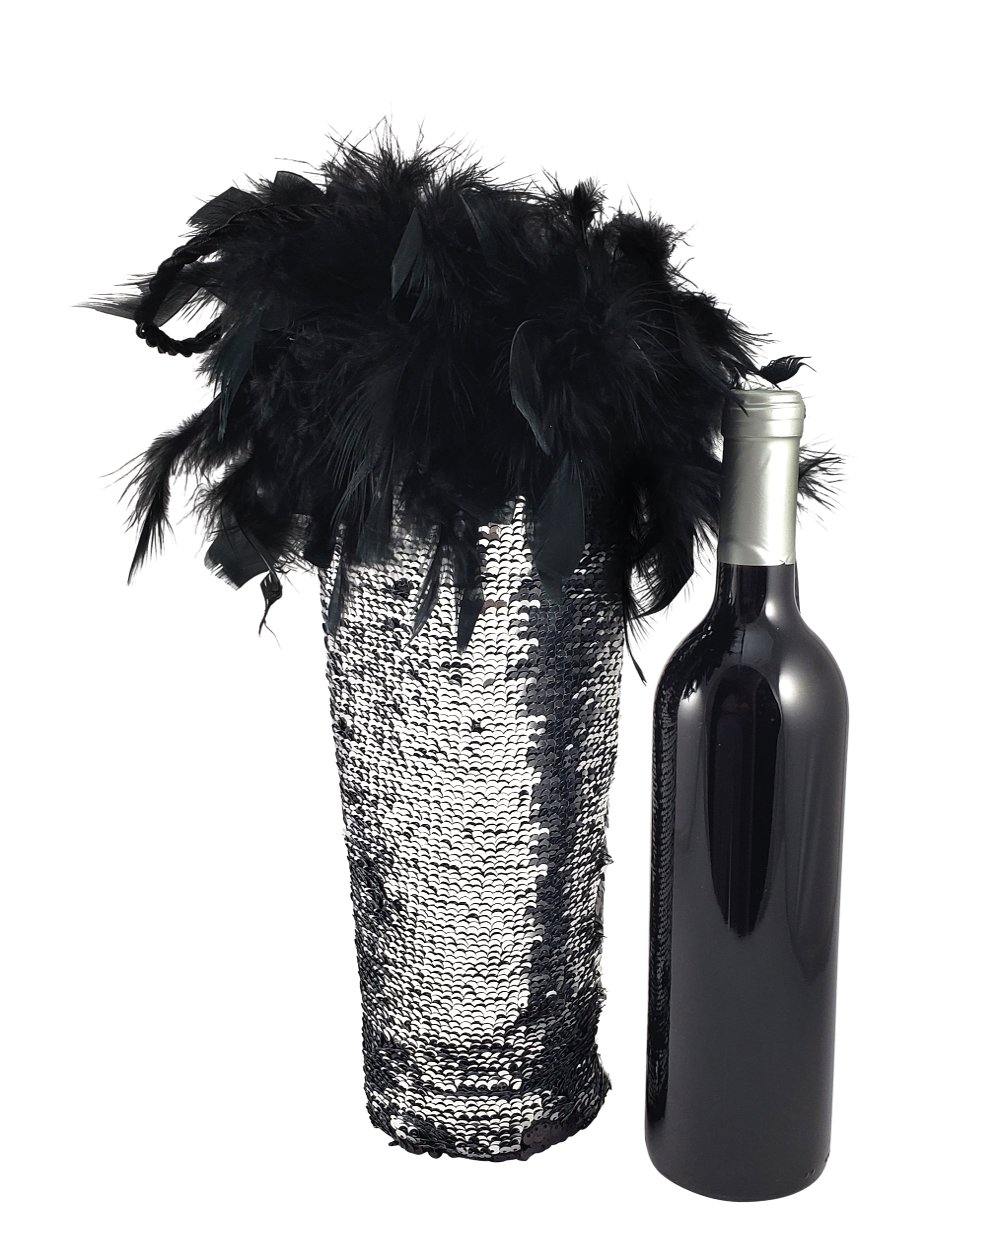 Silver and Black Wine Bag by Tipsy Totes